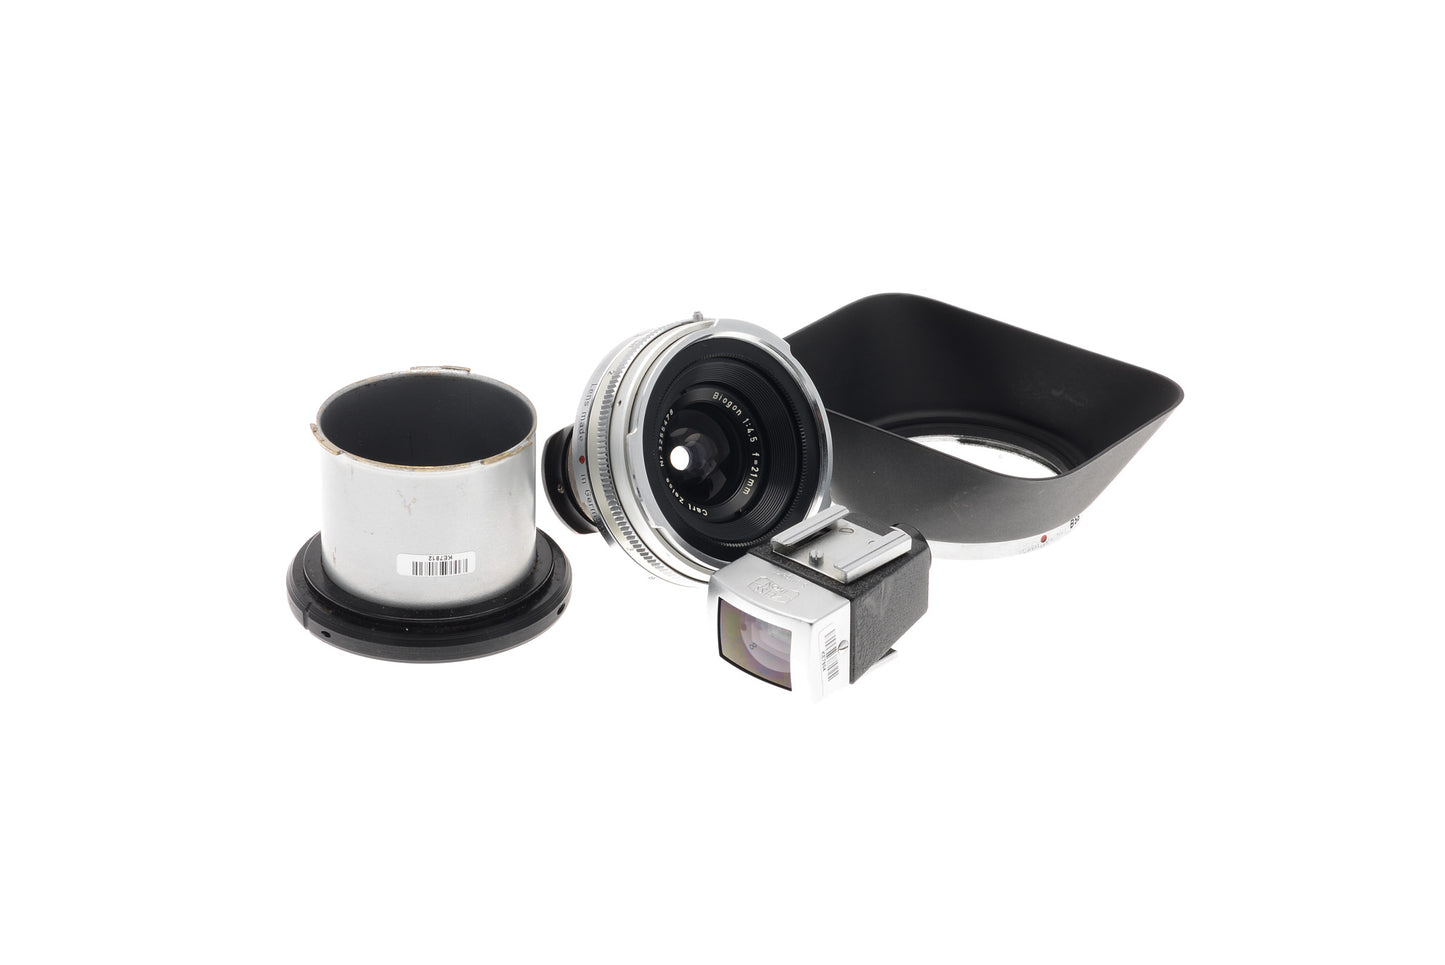 Carl Zeiss 21mm f4.5 Biogon + 21mm Viewfinder For Contarex + B56 Lens Hood  for 21-35mm Contarex Lenses